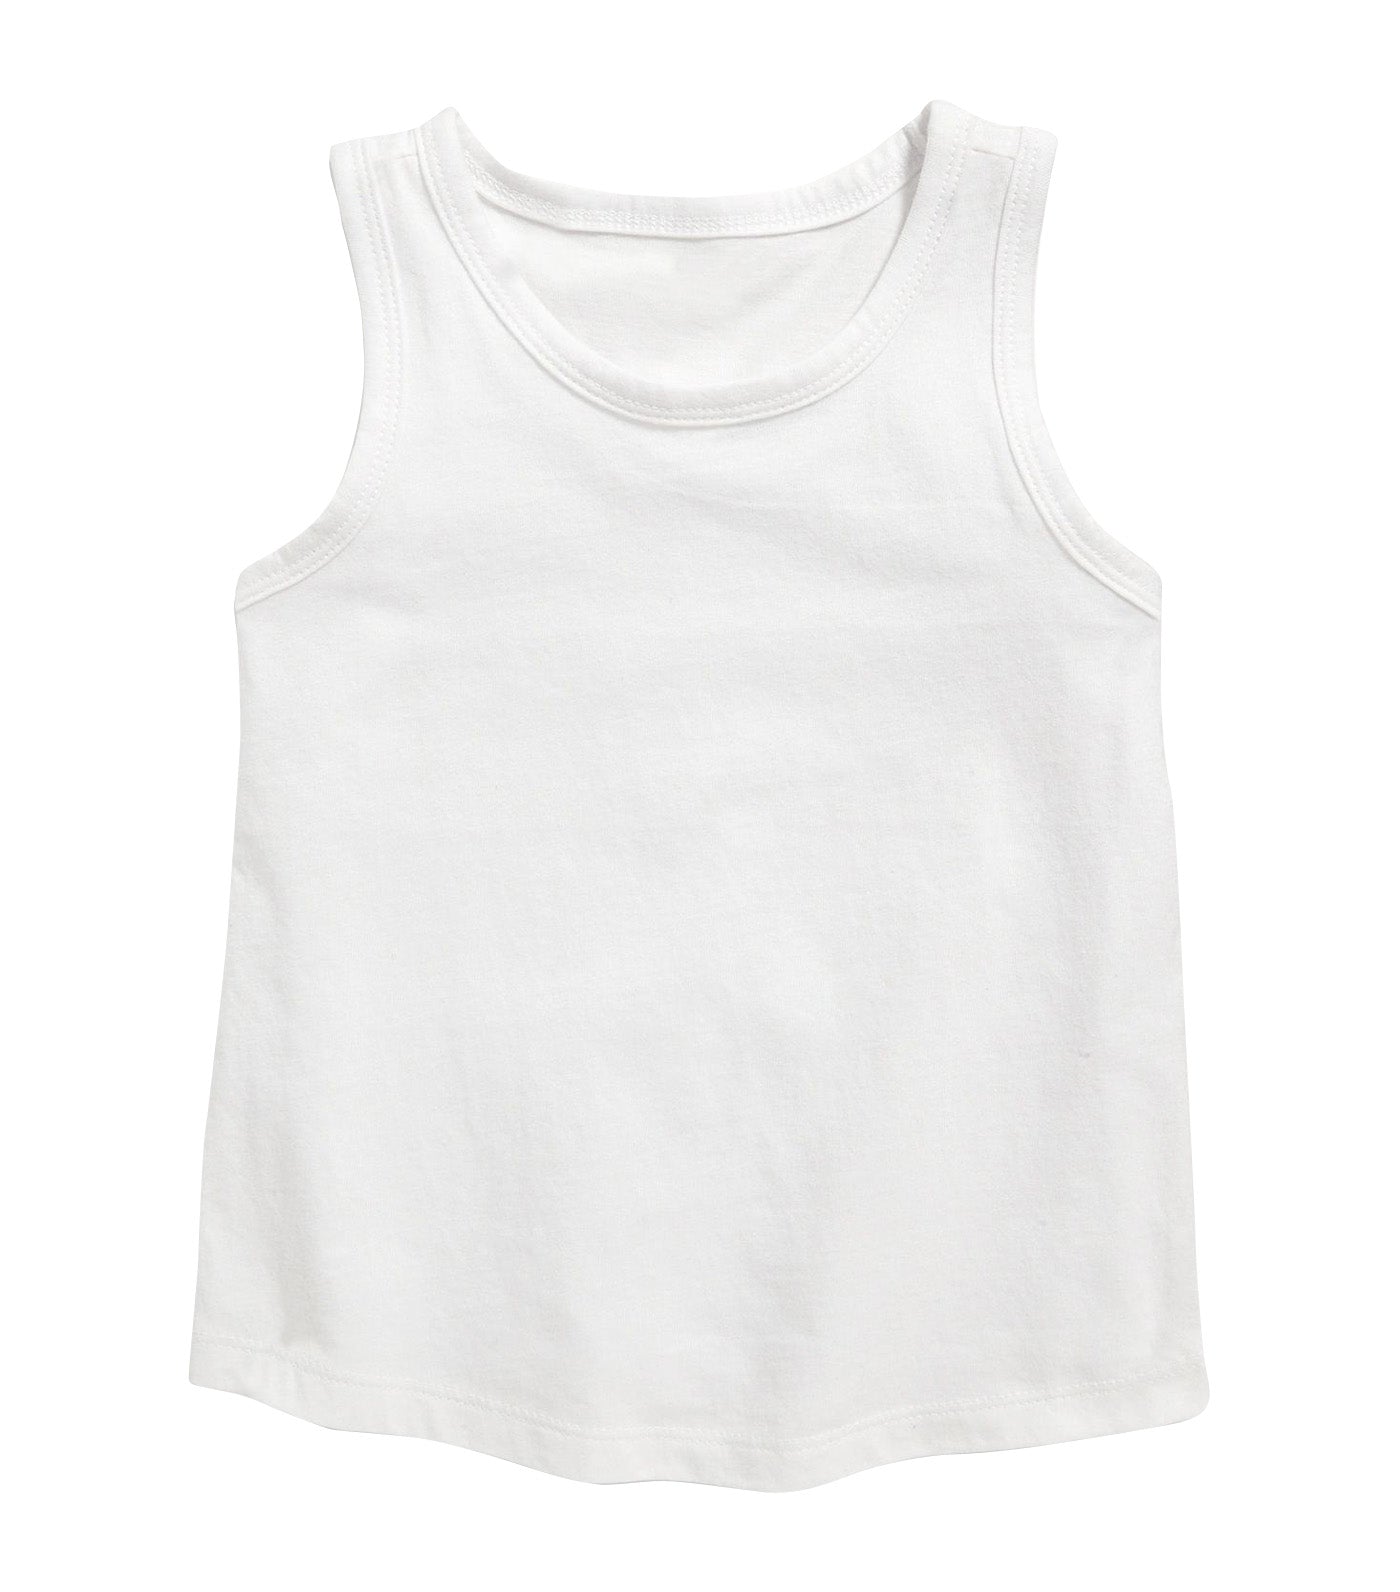 Tank Top for Toddler Girls - Calla Lily